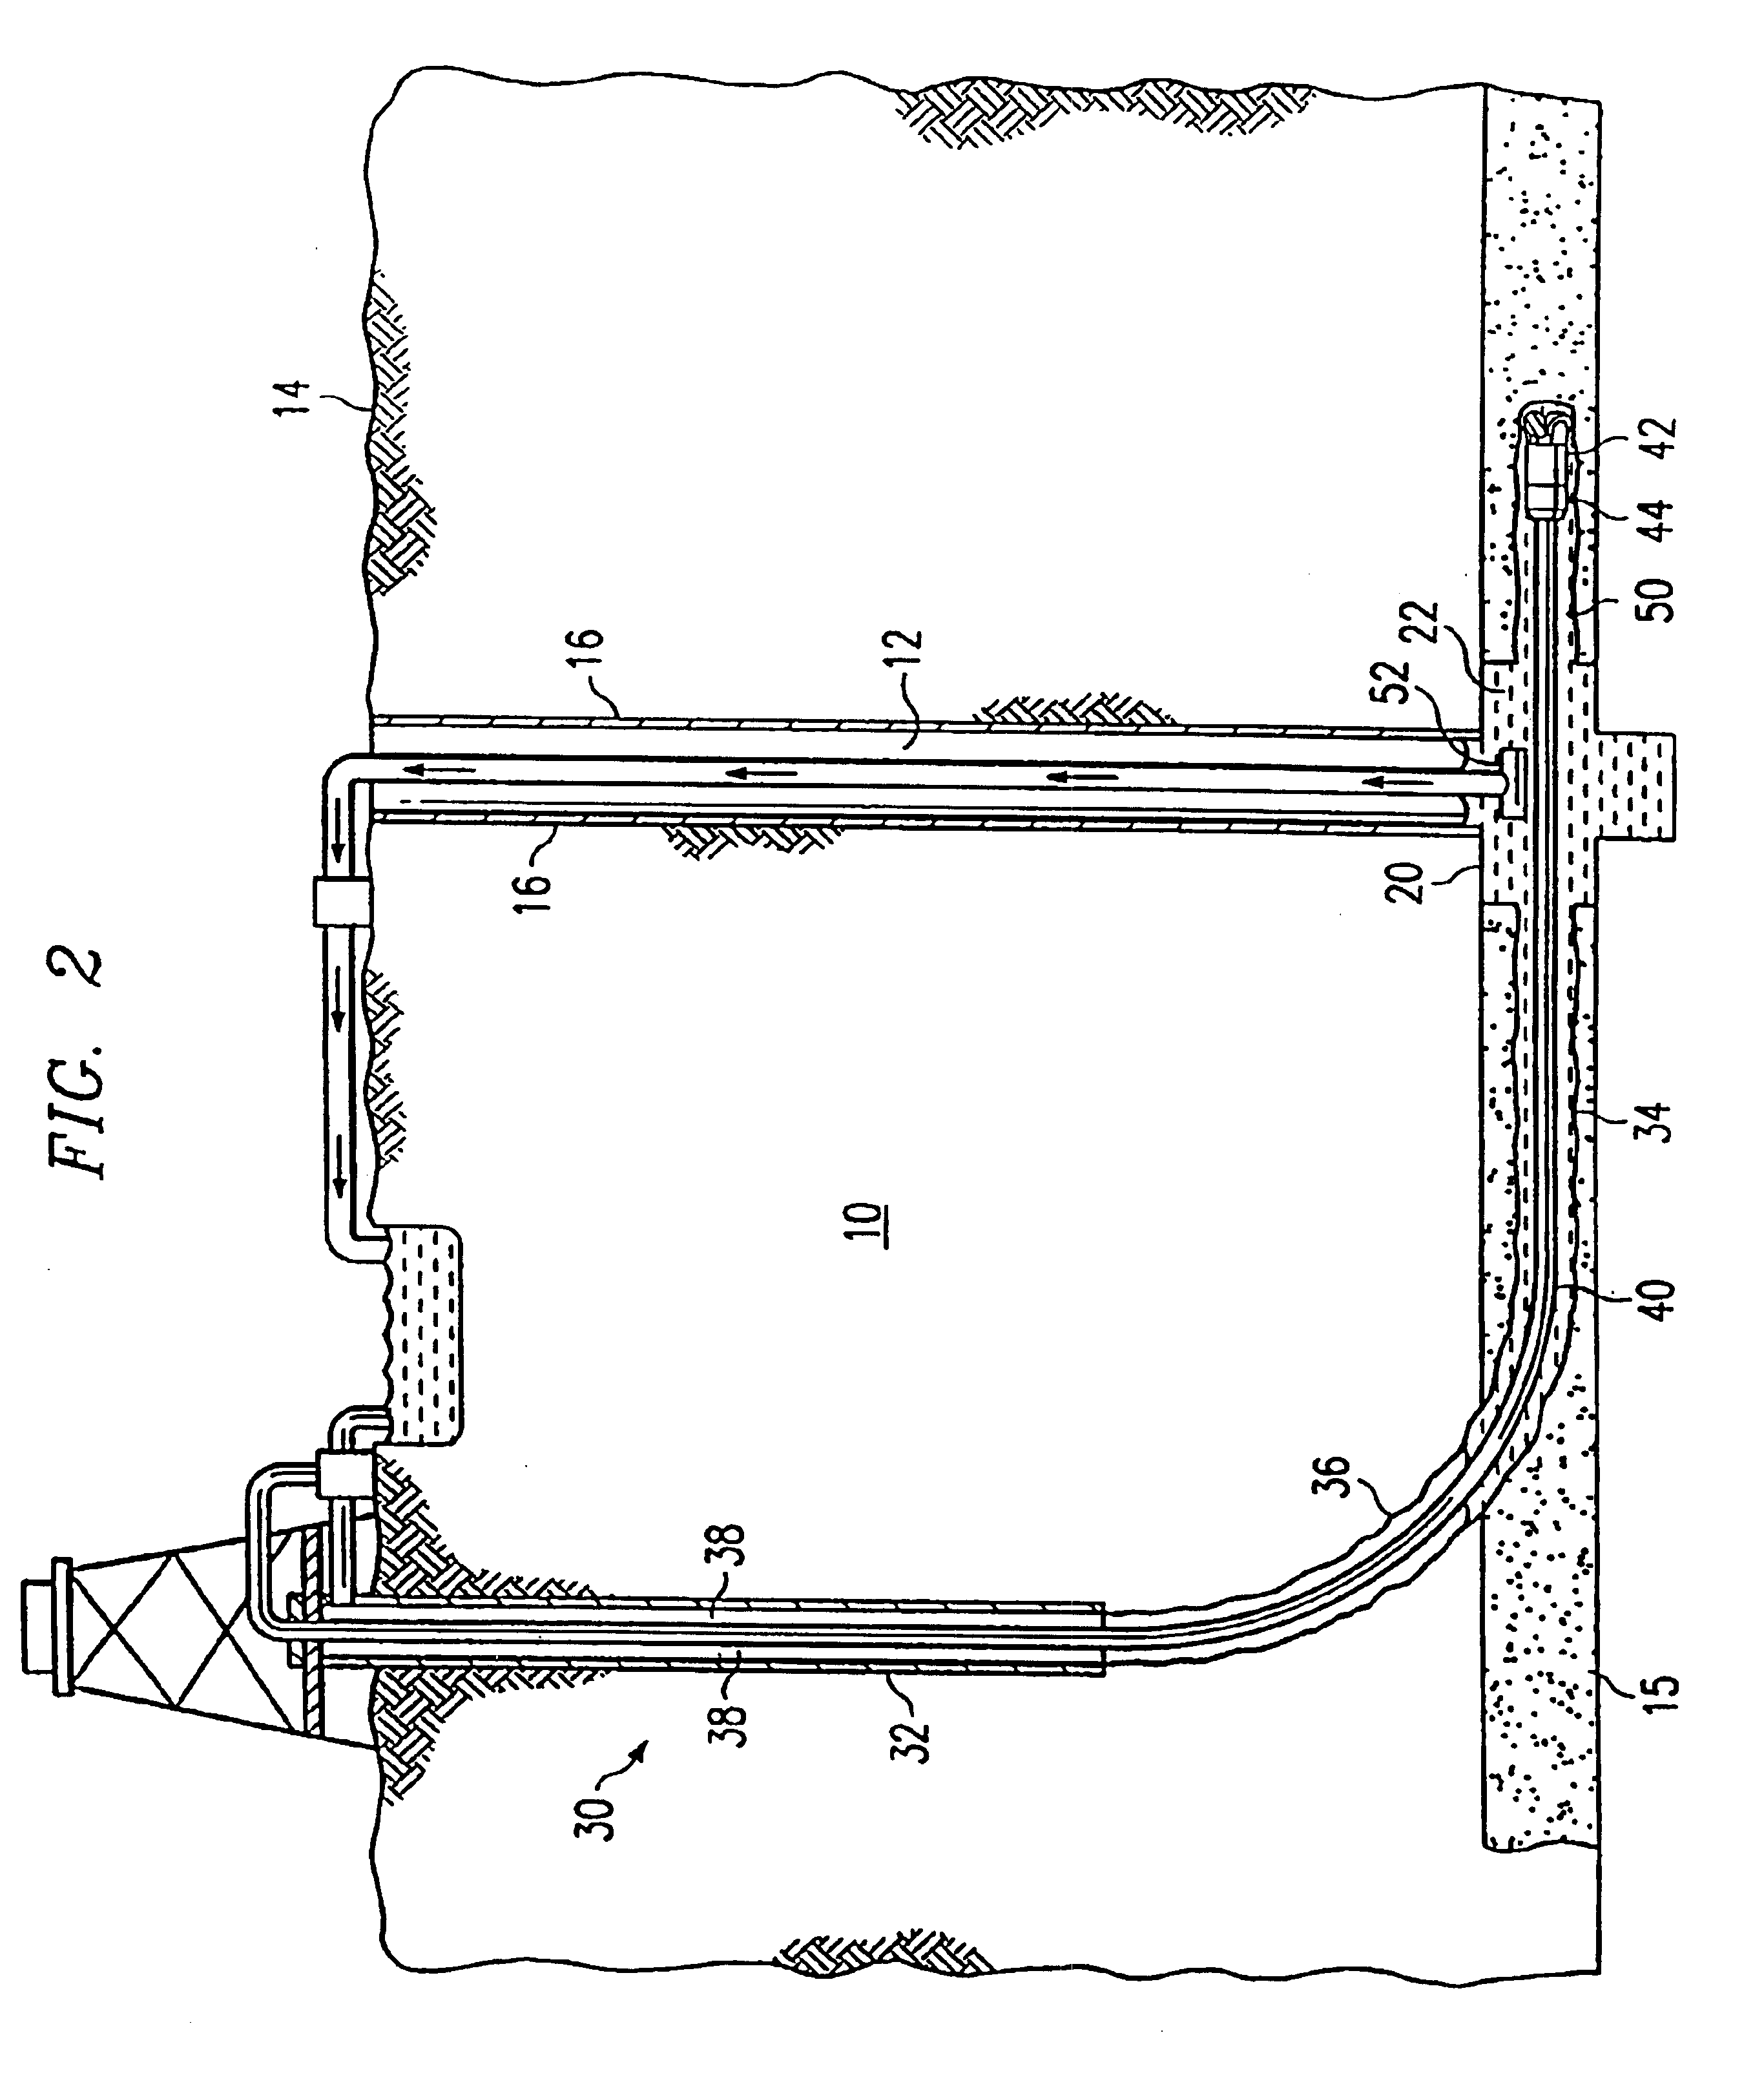 Method and system for accessing subterranean deposits from the surface